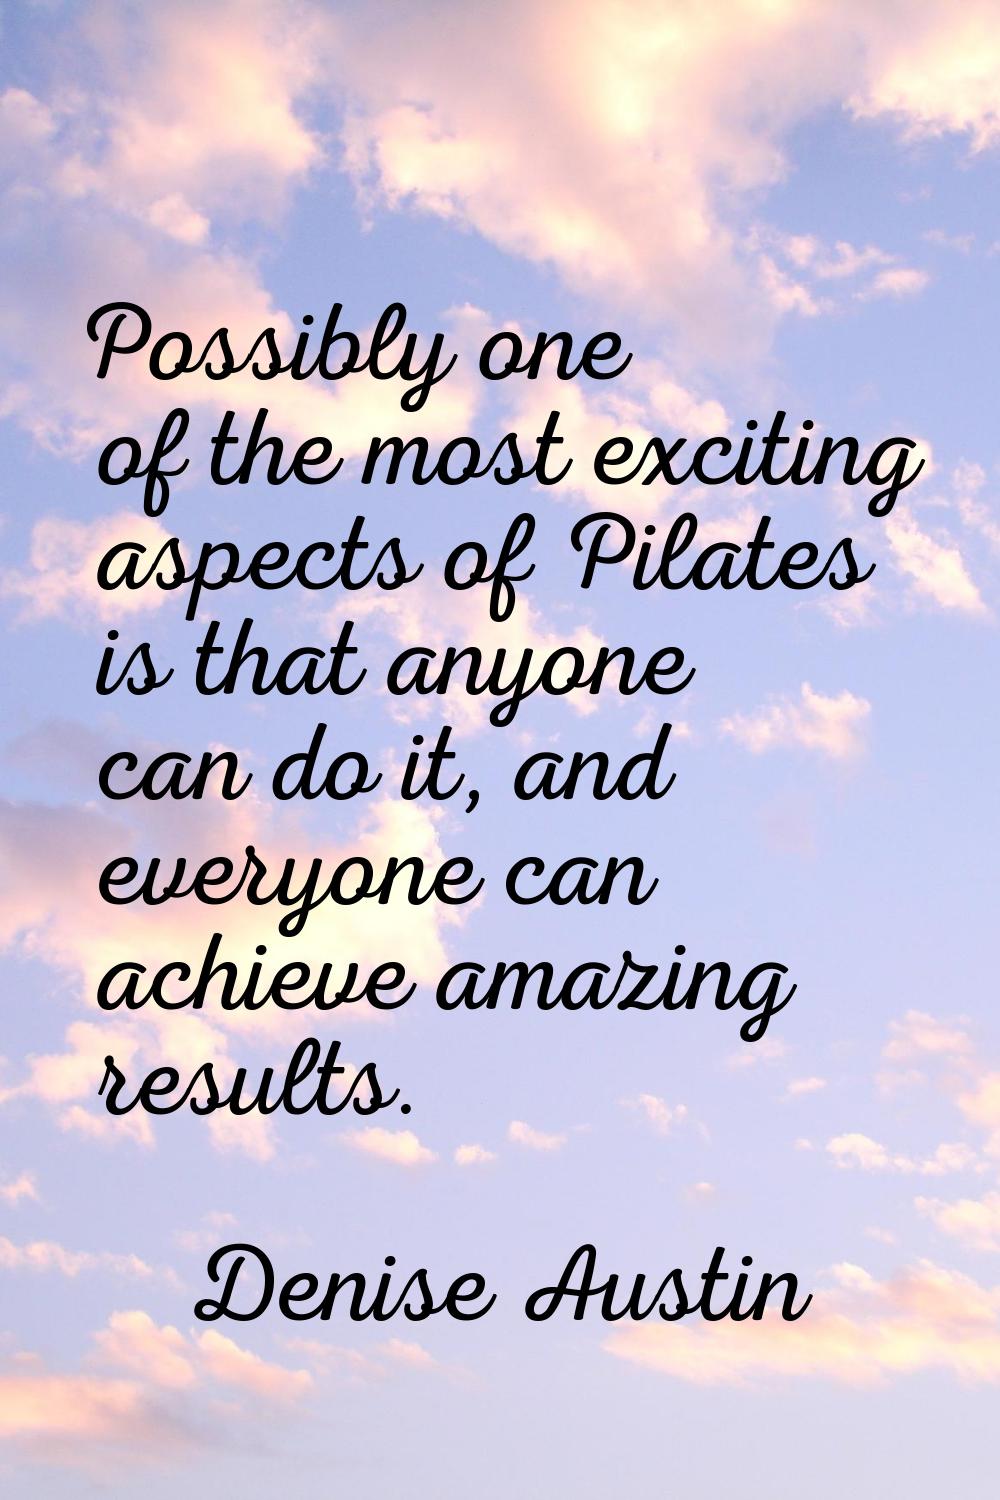 Possibly one of the most exciting aspects of Pilates is that anyone can do it, and everyone can ach